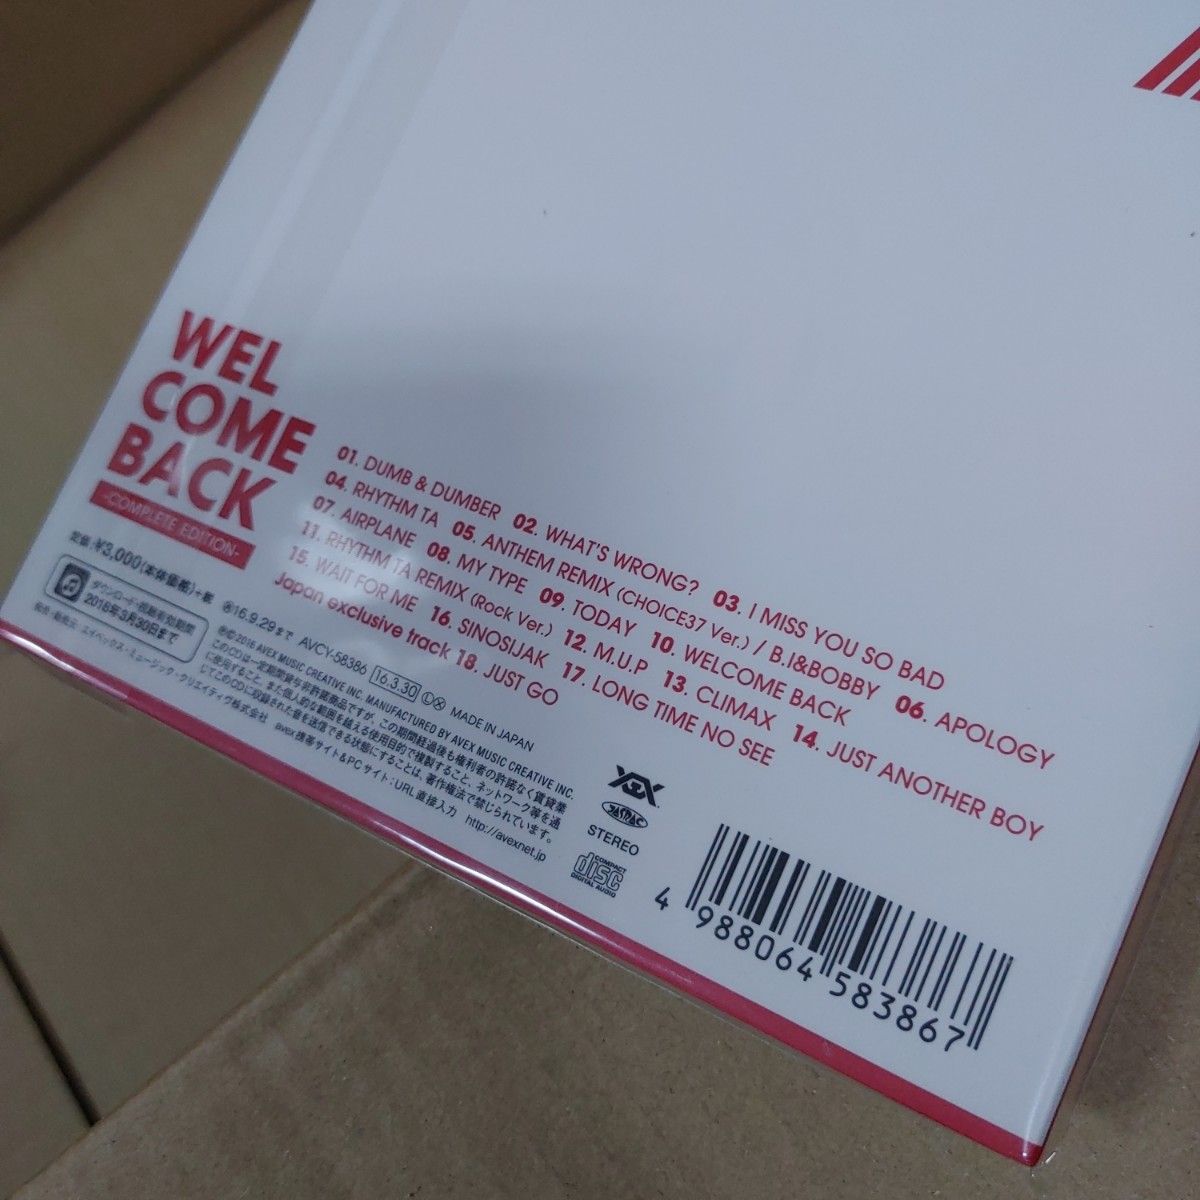 [257] CD iKON WELCOME BACK -COMPLETE EDITION- ケース交換